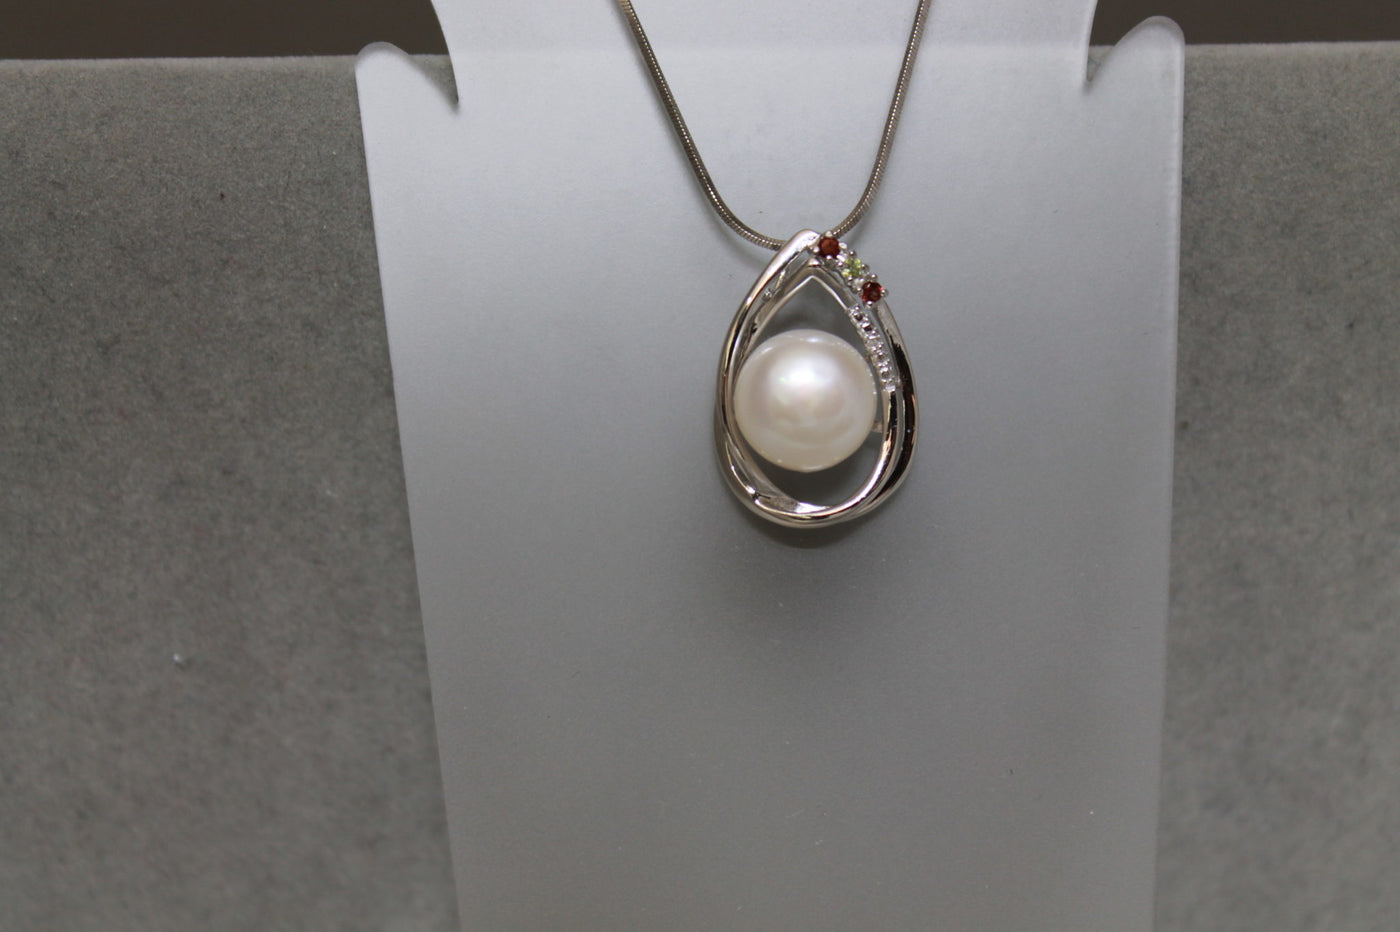 14mm white pearl and gems pendant set in Sterling Silver